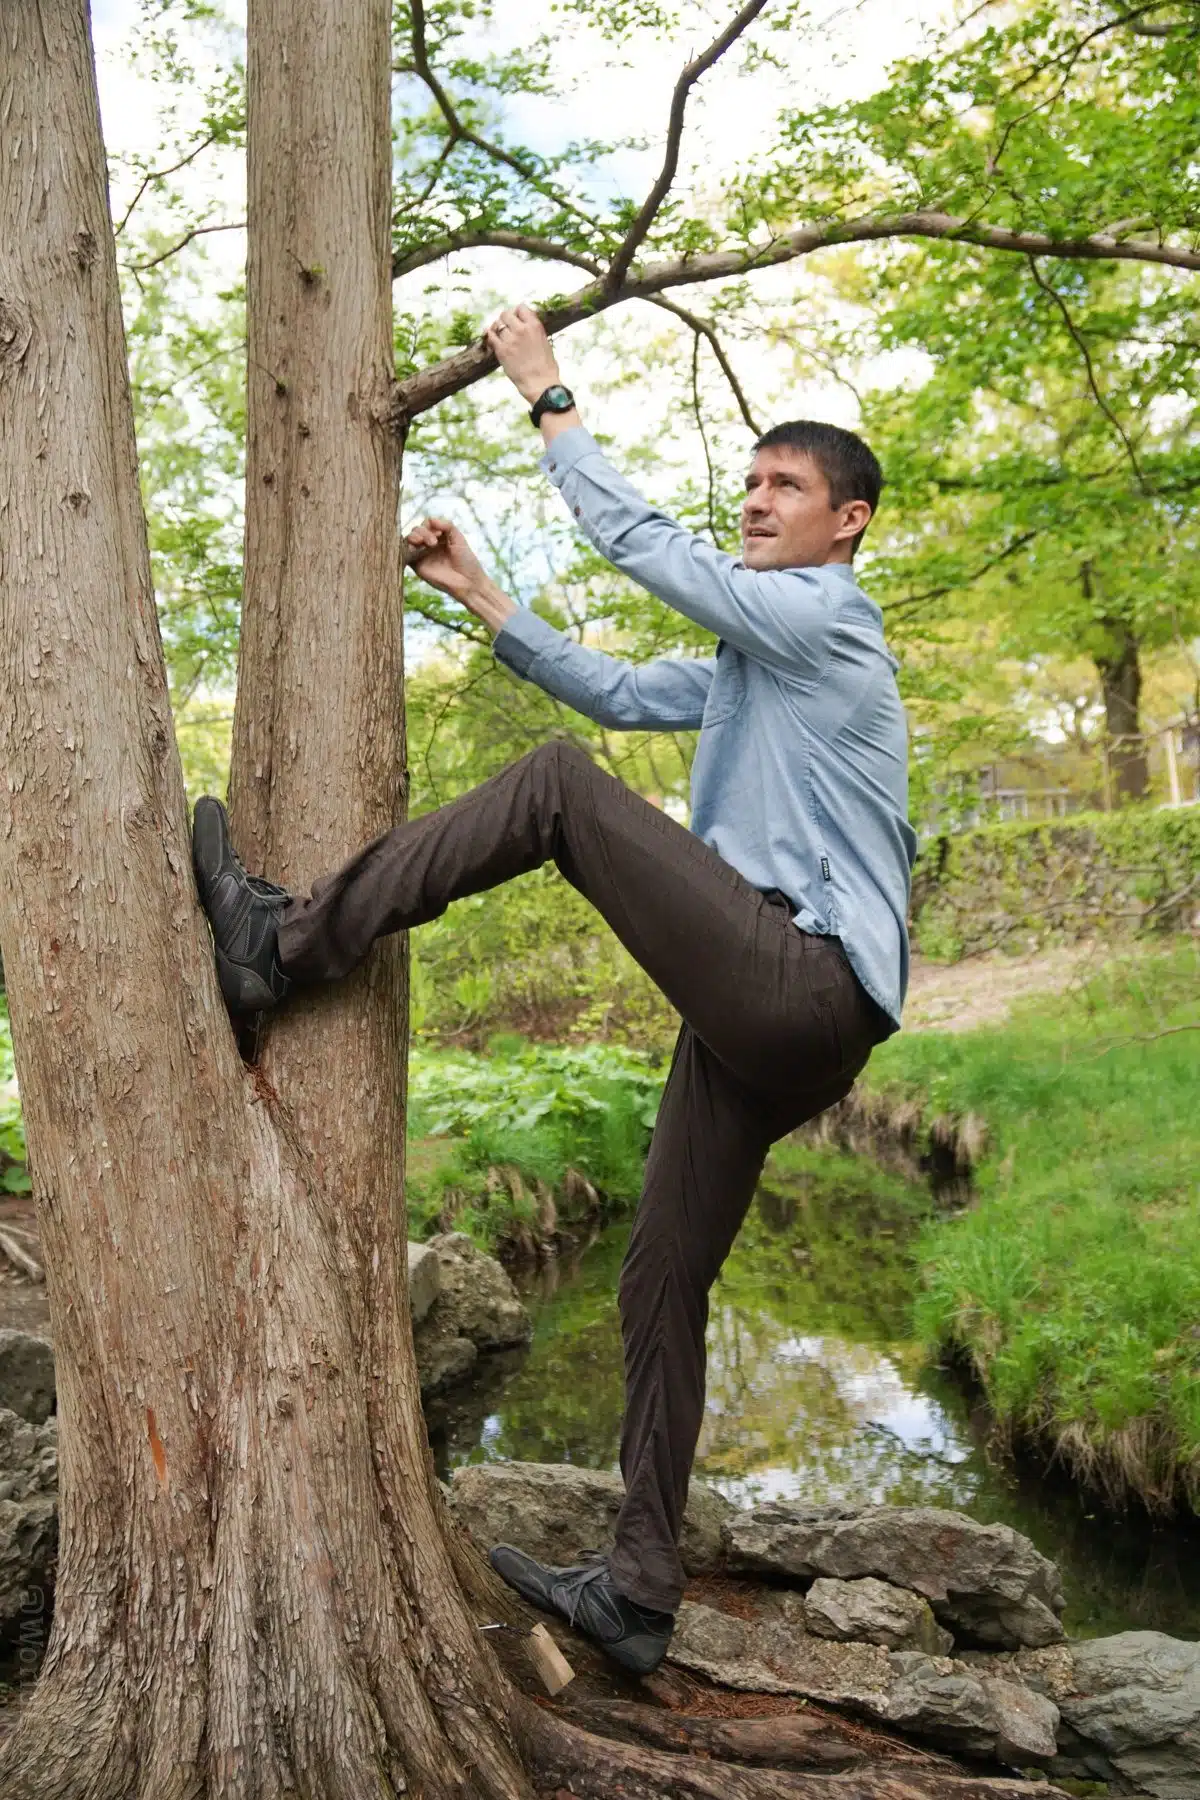 No problem climbing a tree in those pants!